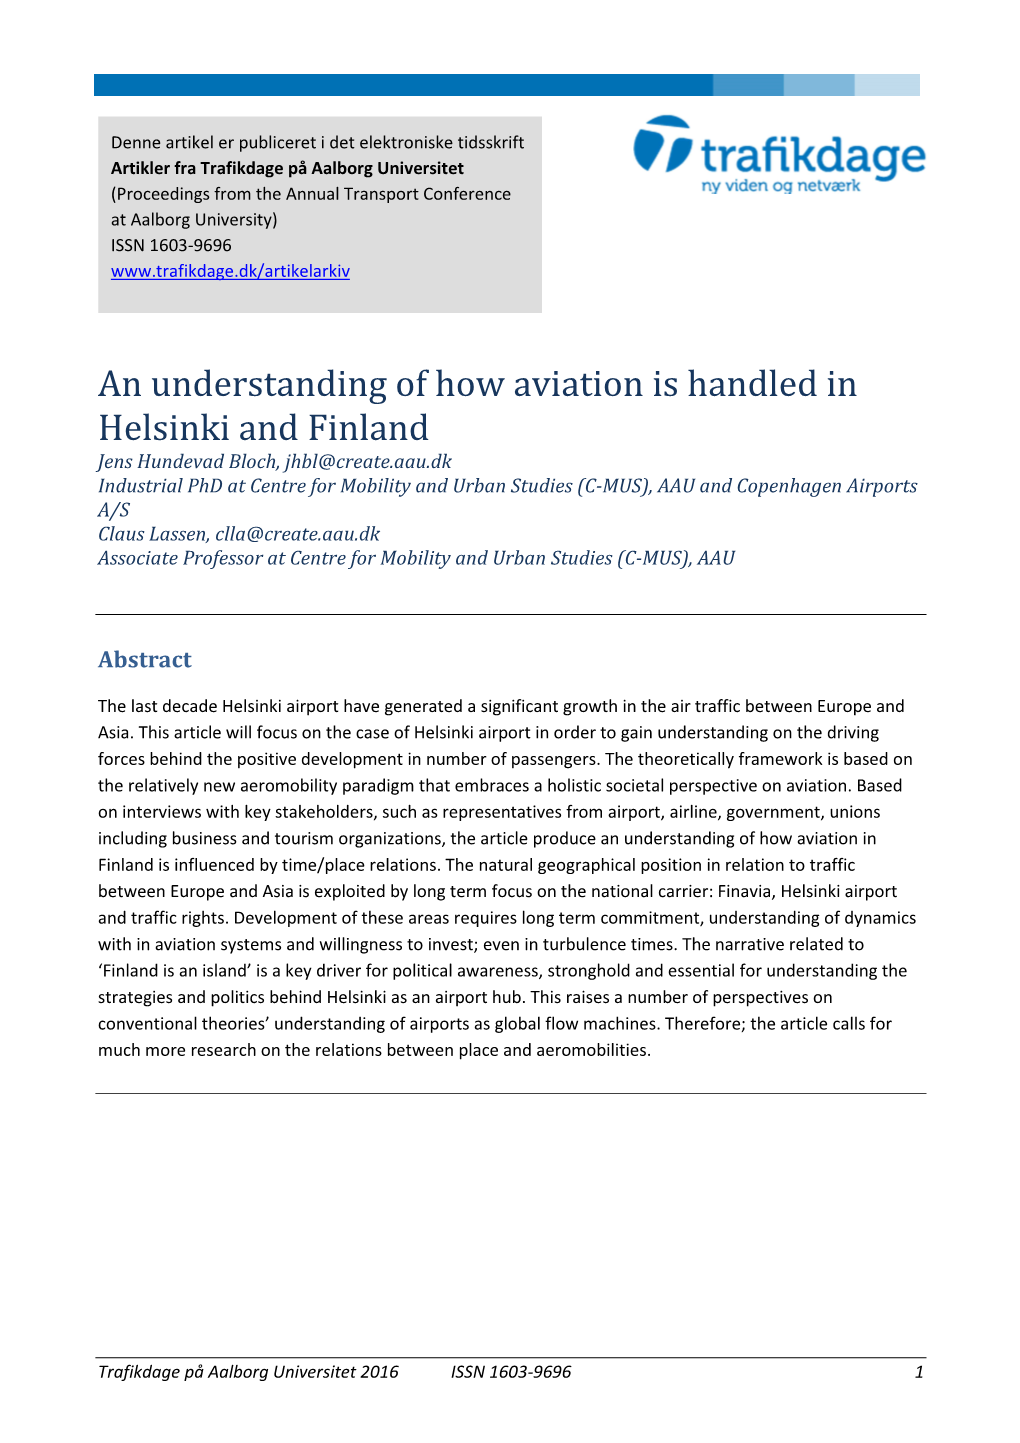 An Understanding of How Aviation Is Handled in Helsinki and Finland